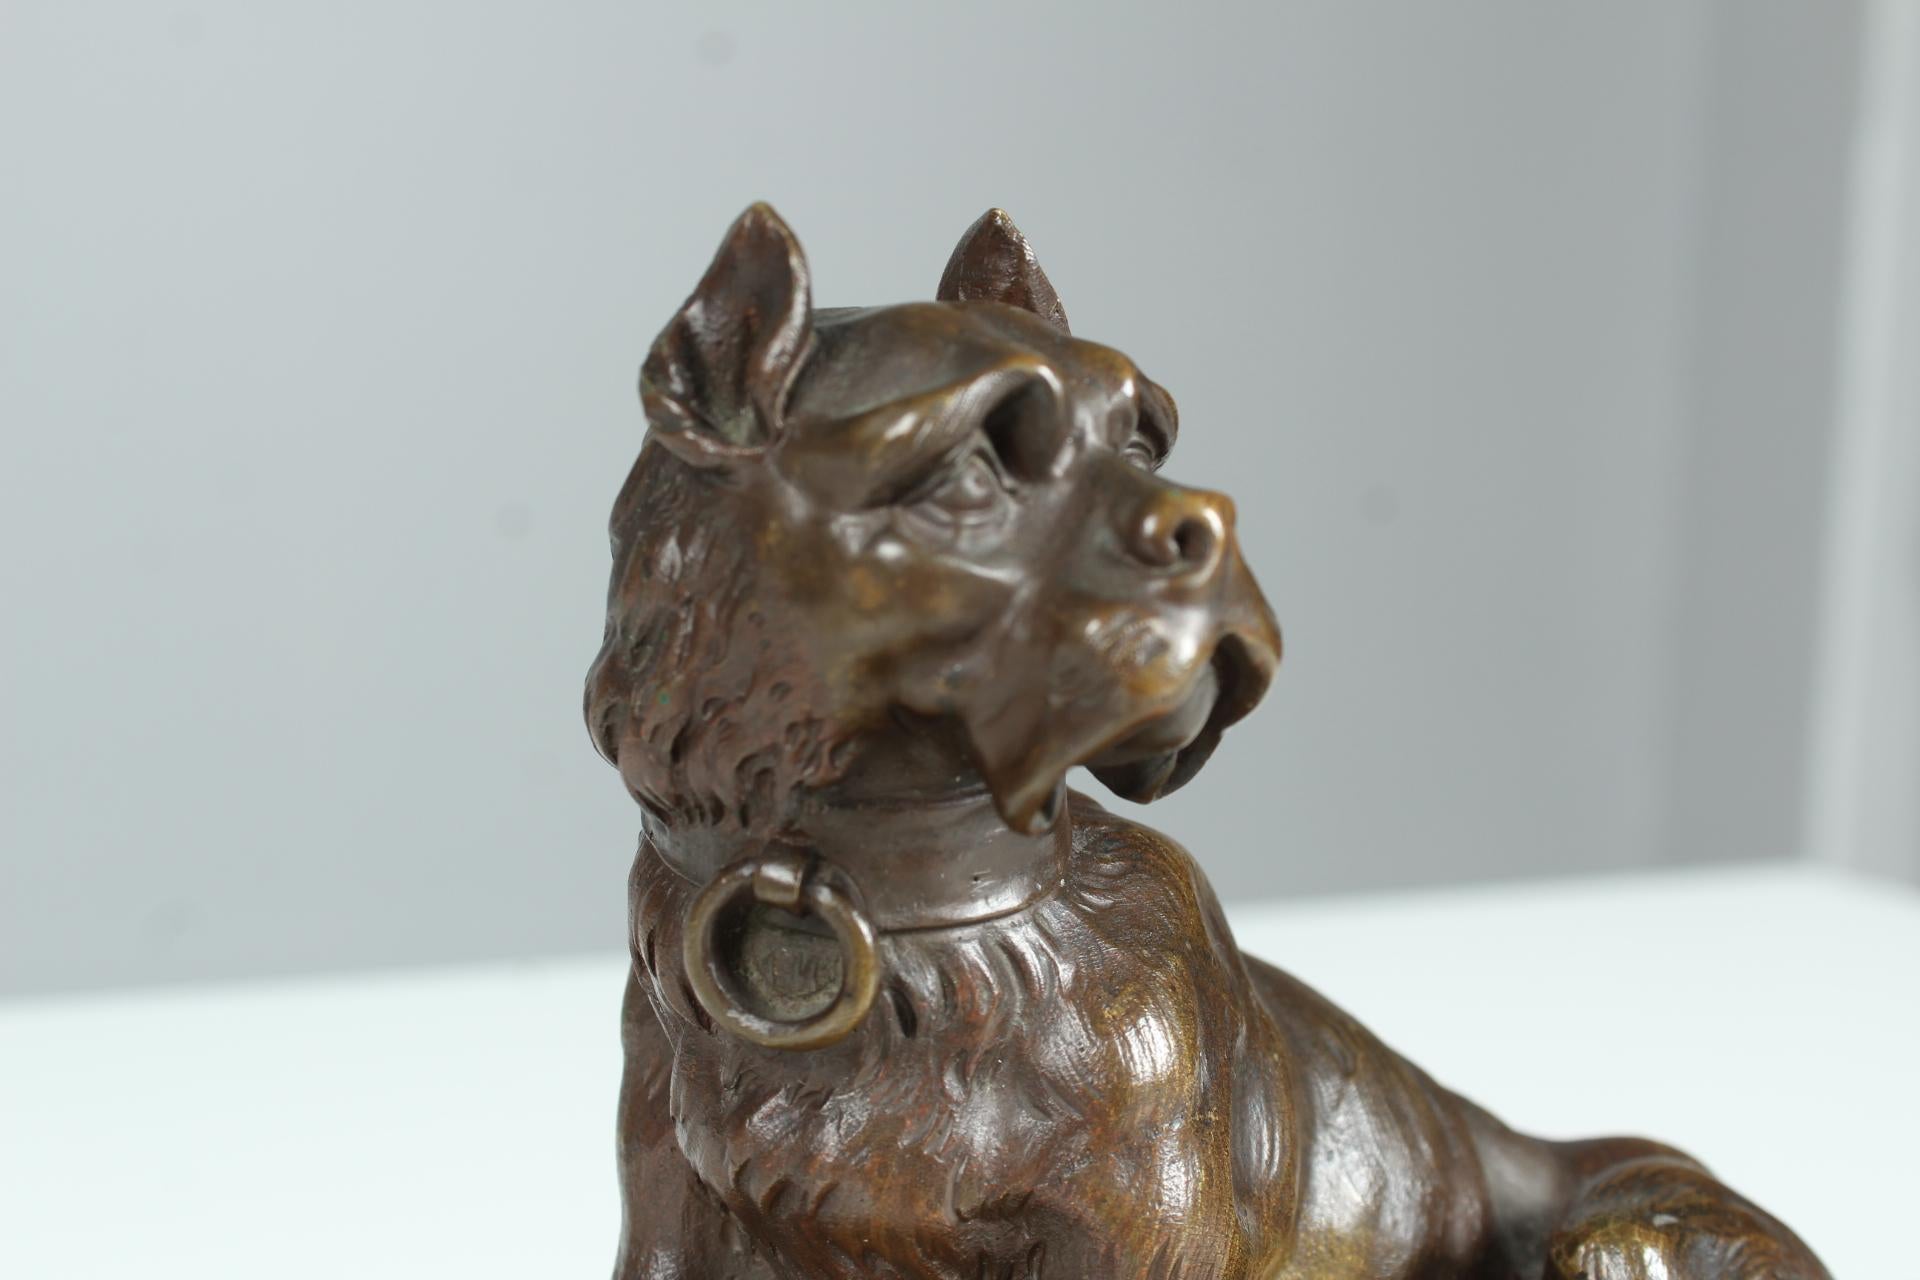 Antique bronze sculpture, depicting a sitting bulldog.
Nicely chiseled bronze work o a marble base.

